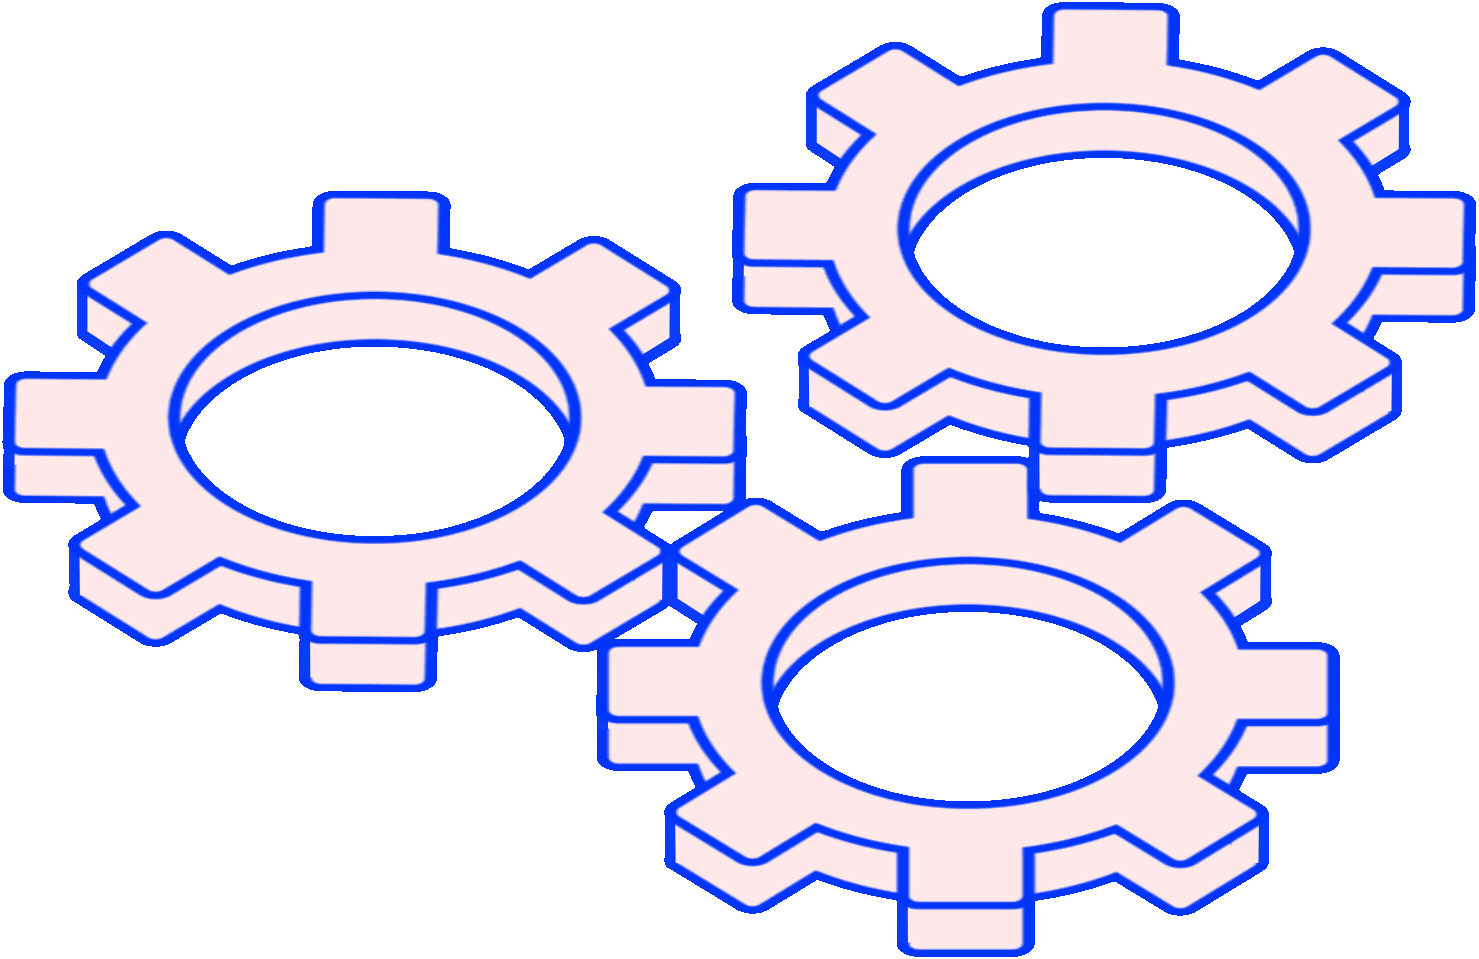 Three cogs in a wheel turning.